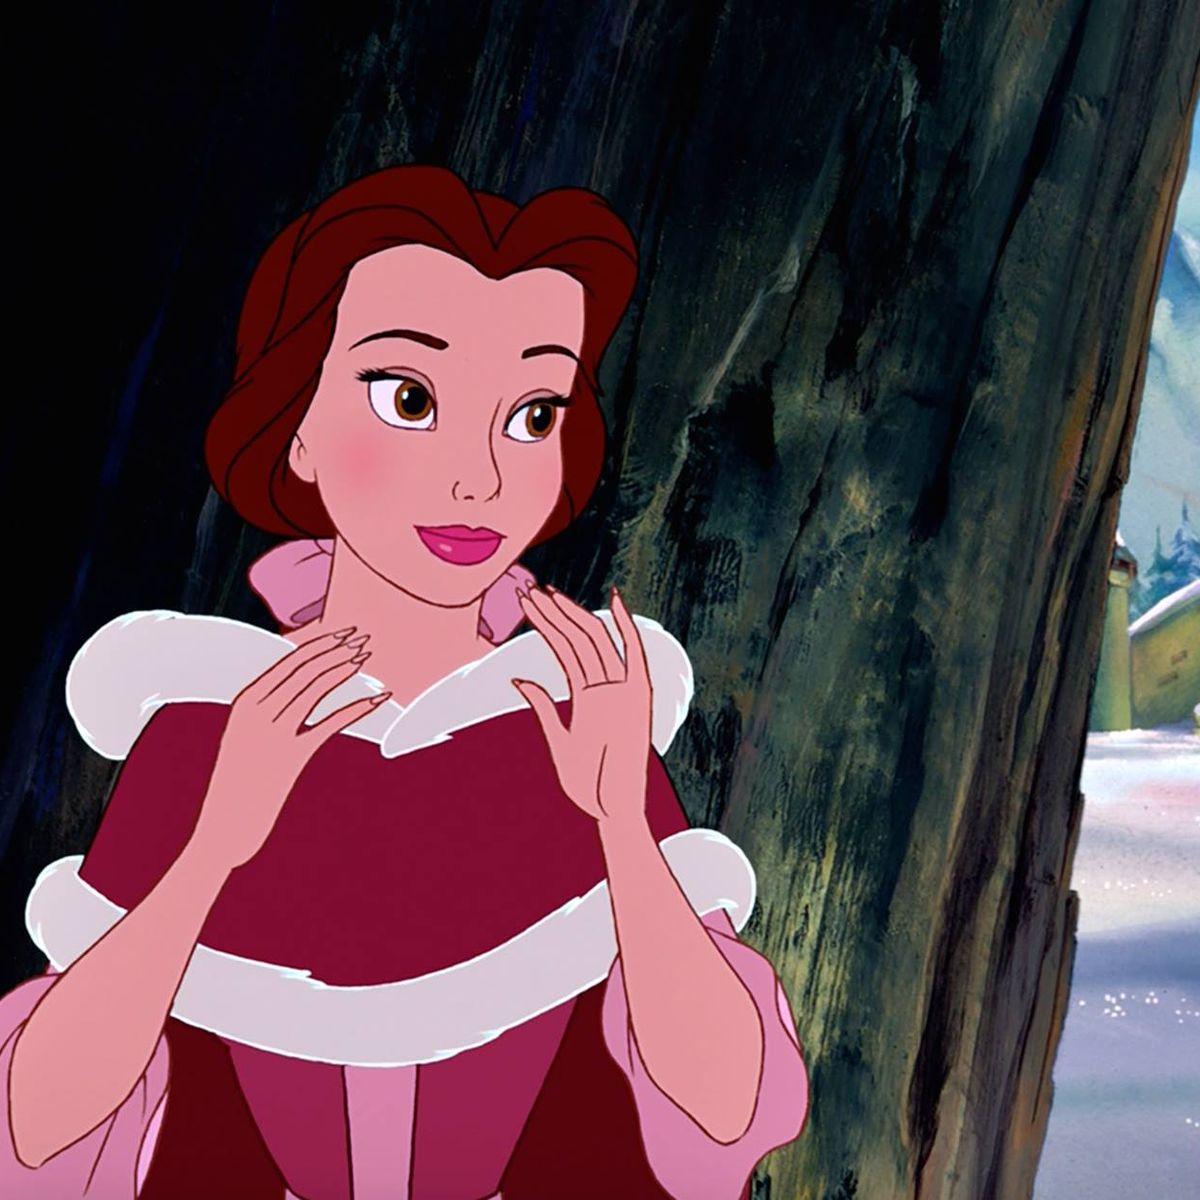 12 Fun Facts About Disney's Beauty and the Beast - Beauty and the Beast  Trivia